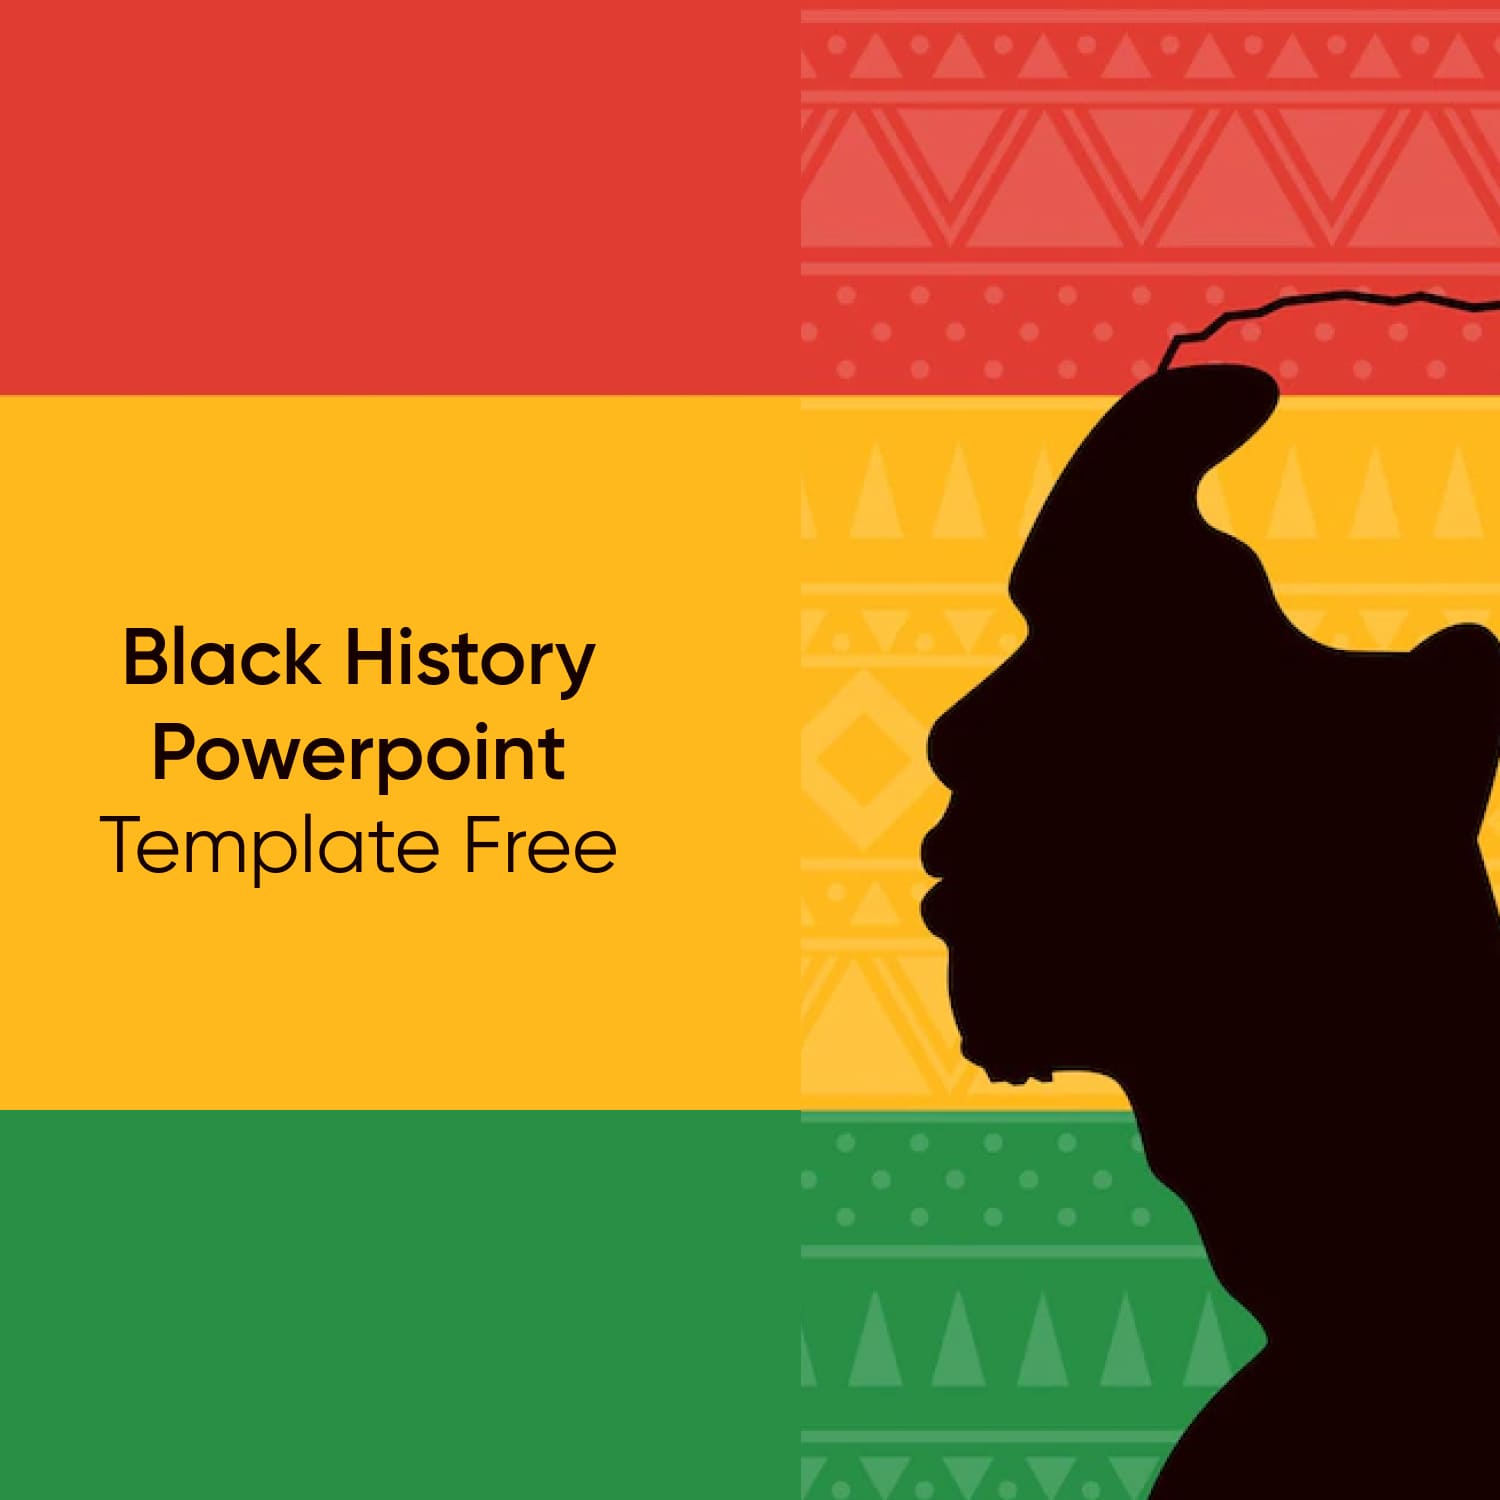 Black History Powerpoint Template Free